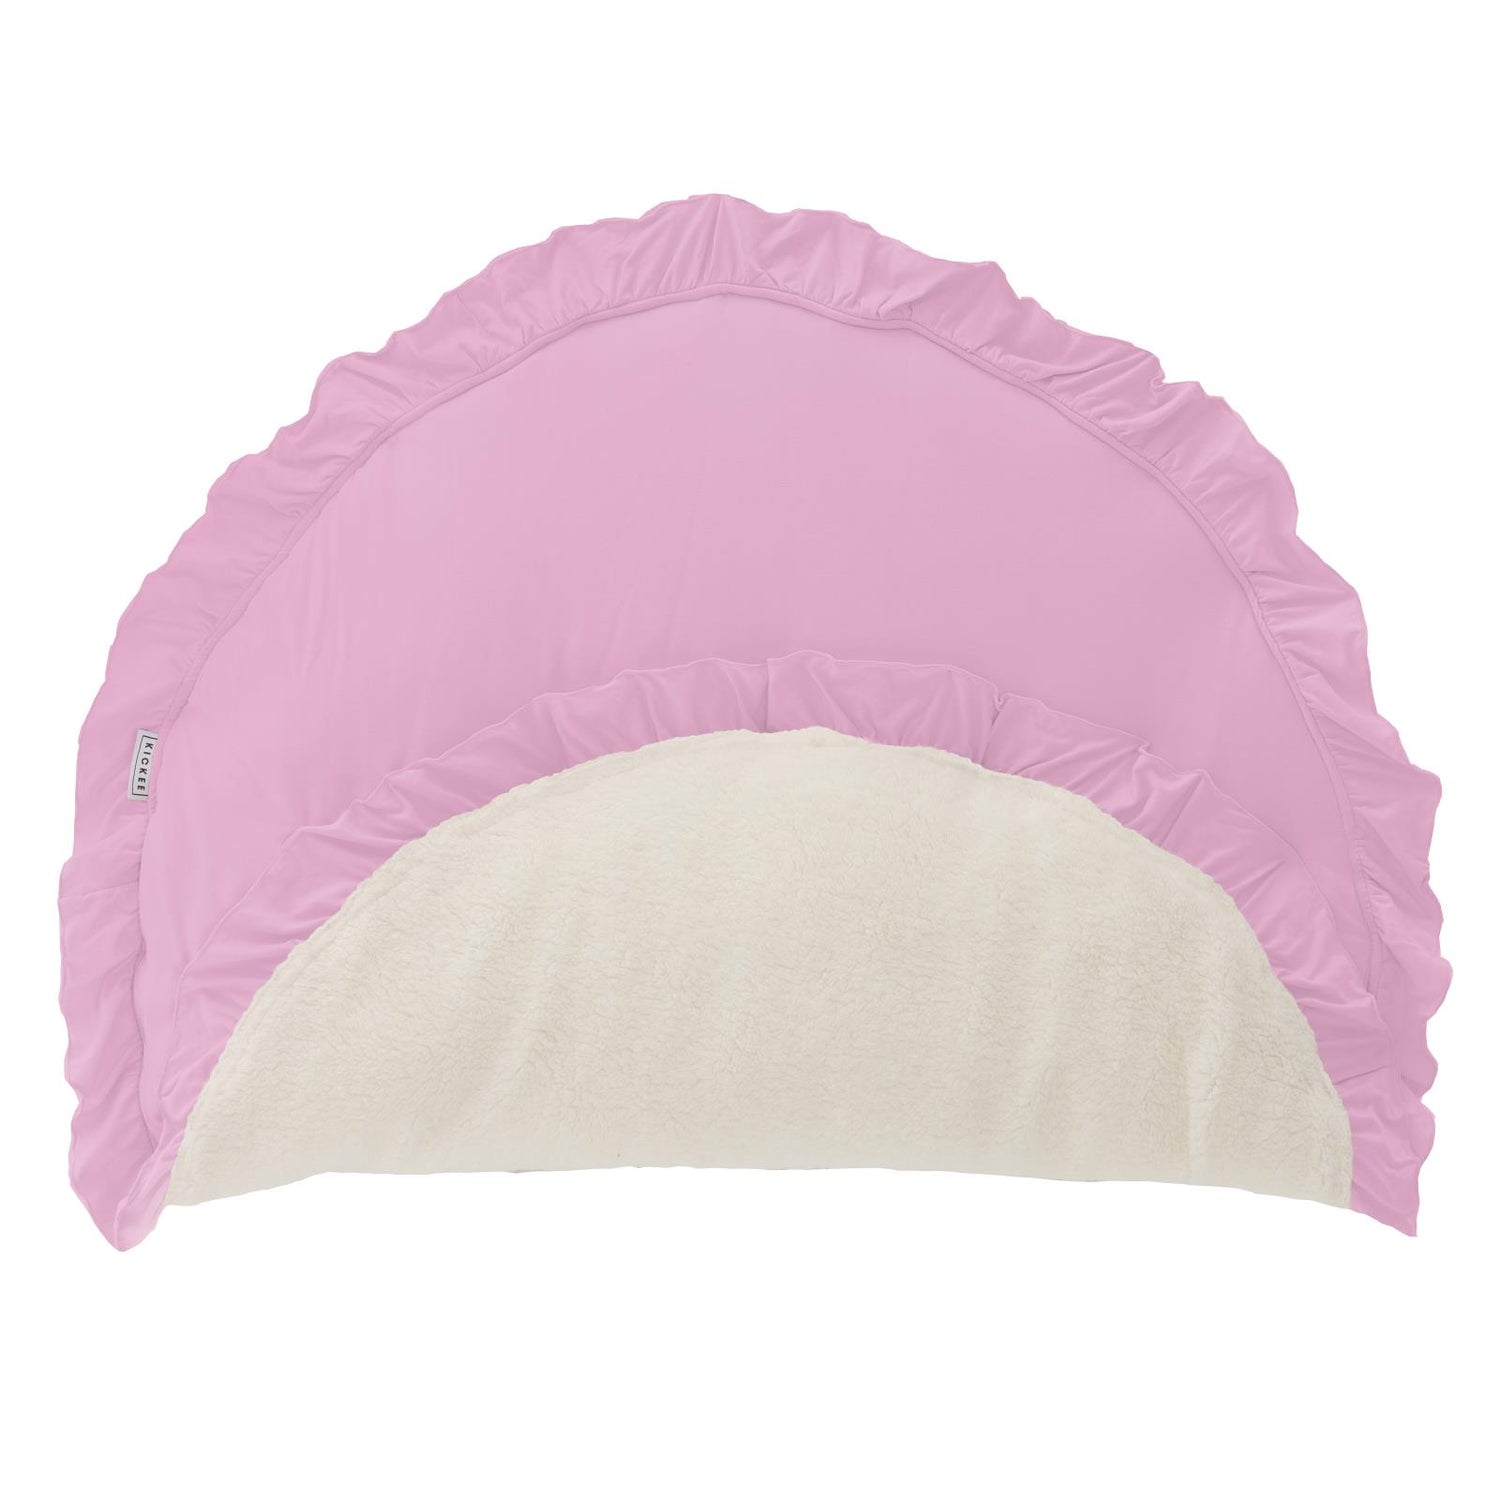 Sherpa-Lined Ruffle Fluffle Playmat in Cotton Candy